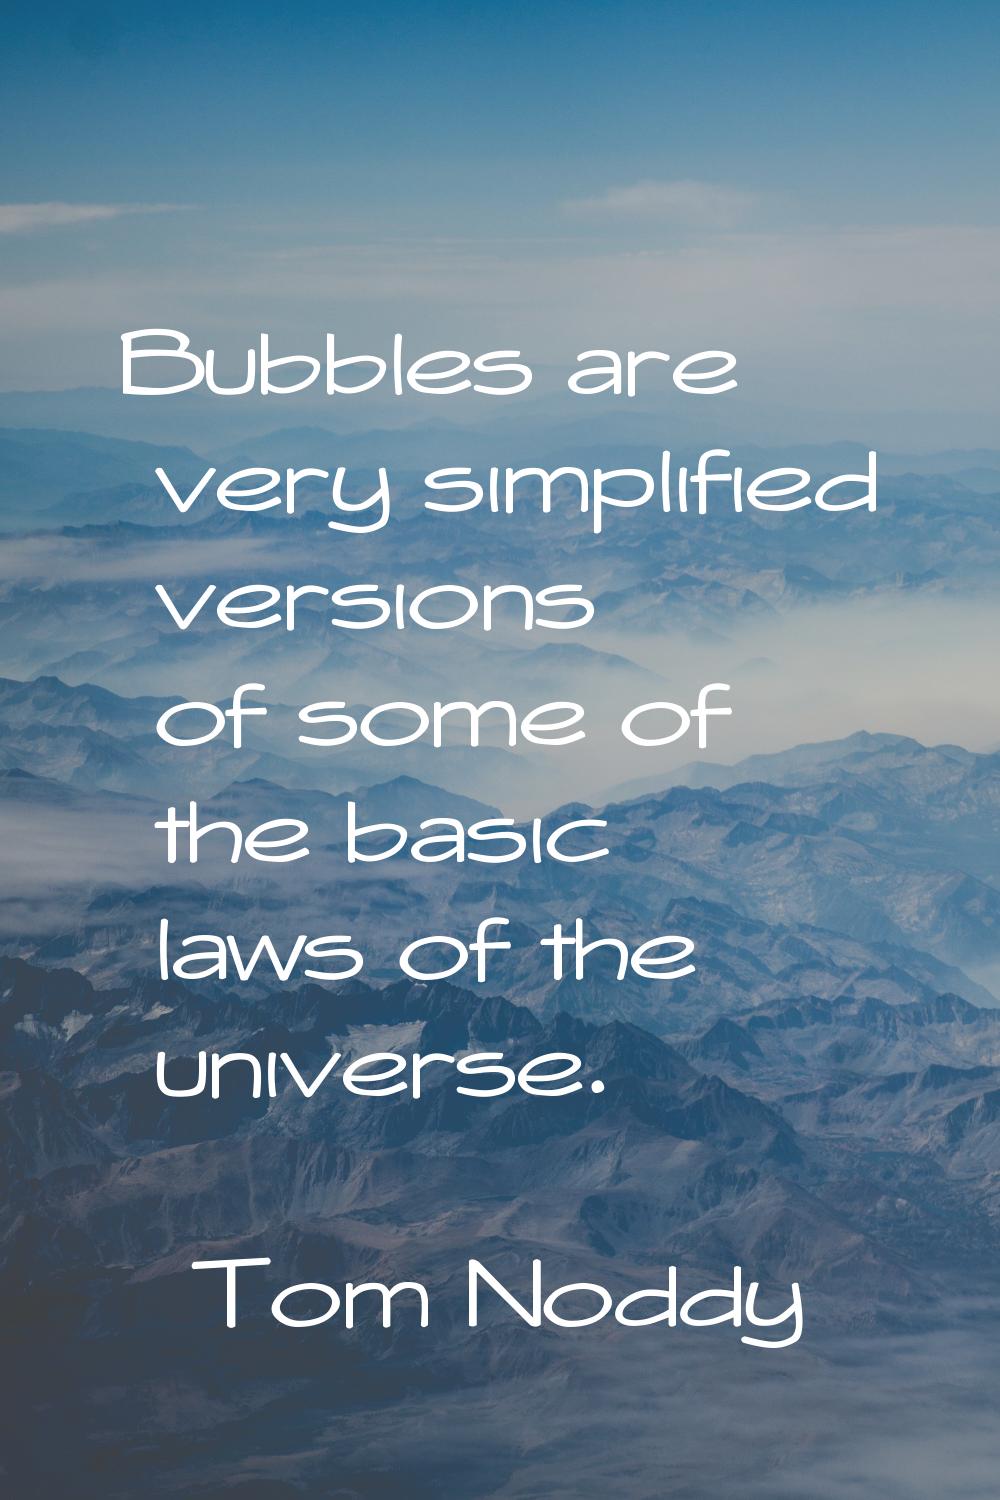 Bubbles are very simplified versions of some of the basic laws of the universe.